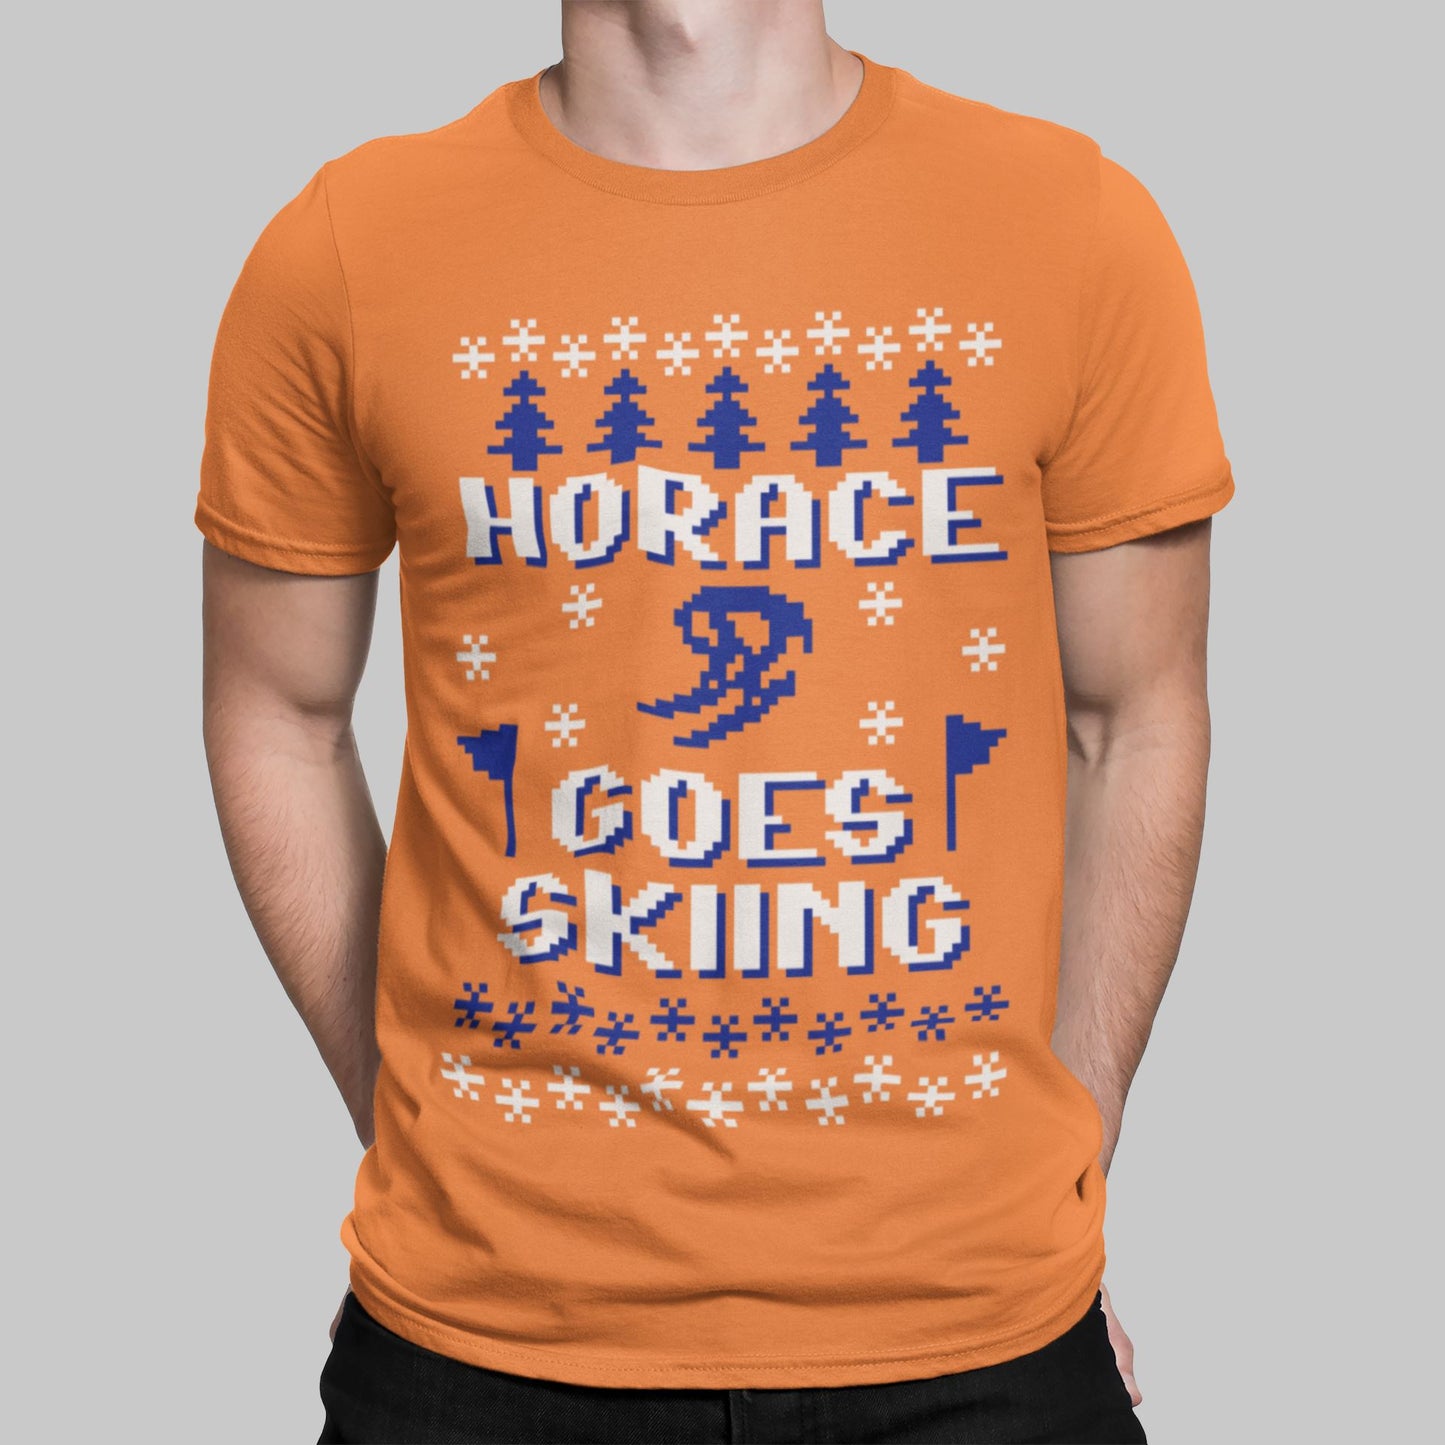 Horace Goes Skiing Retro Gaming T-Shirt T-Shirt Seven Squared Small 34-36" Tangerine 